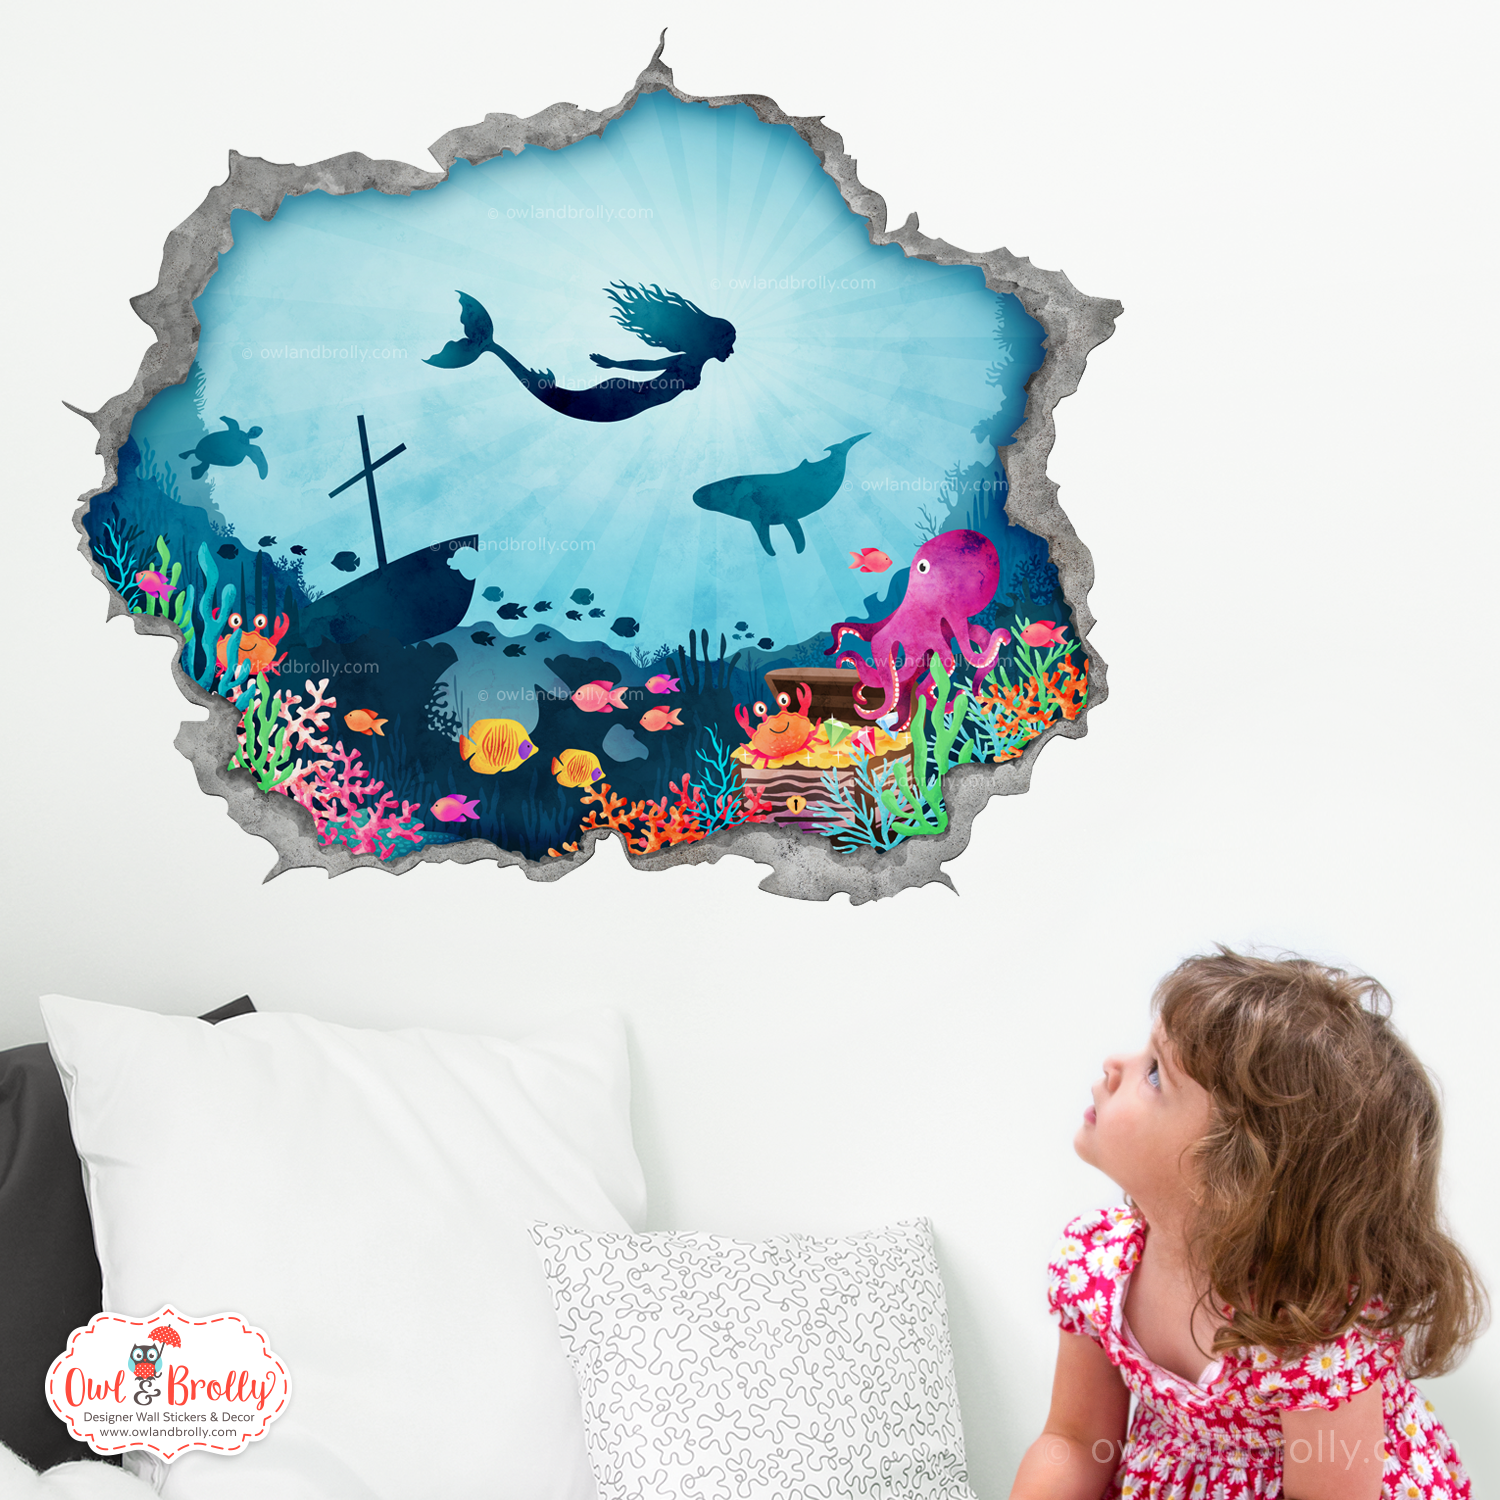 Hole in the wall effect wall sticker – under water animals with mermaid –  Owl & Brolly